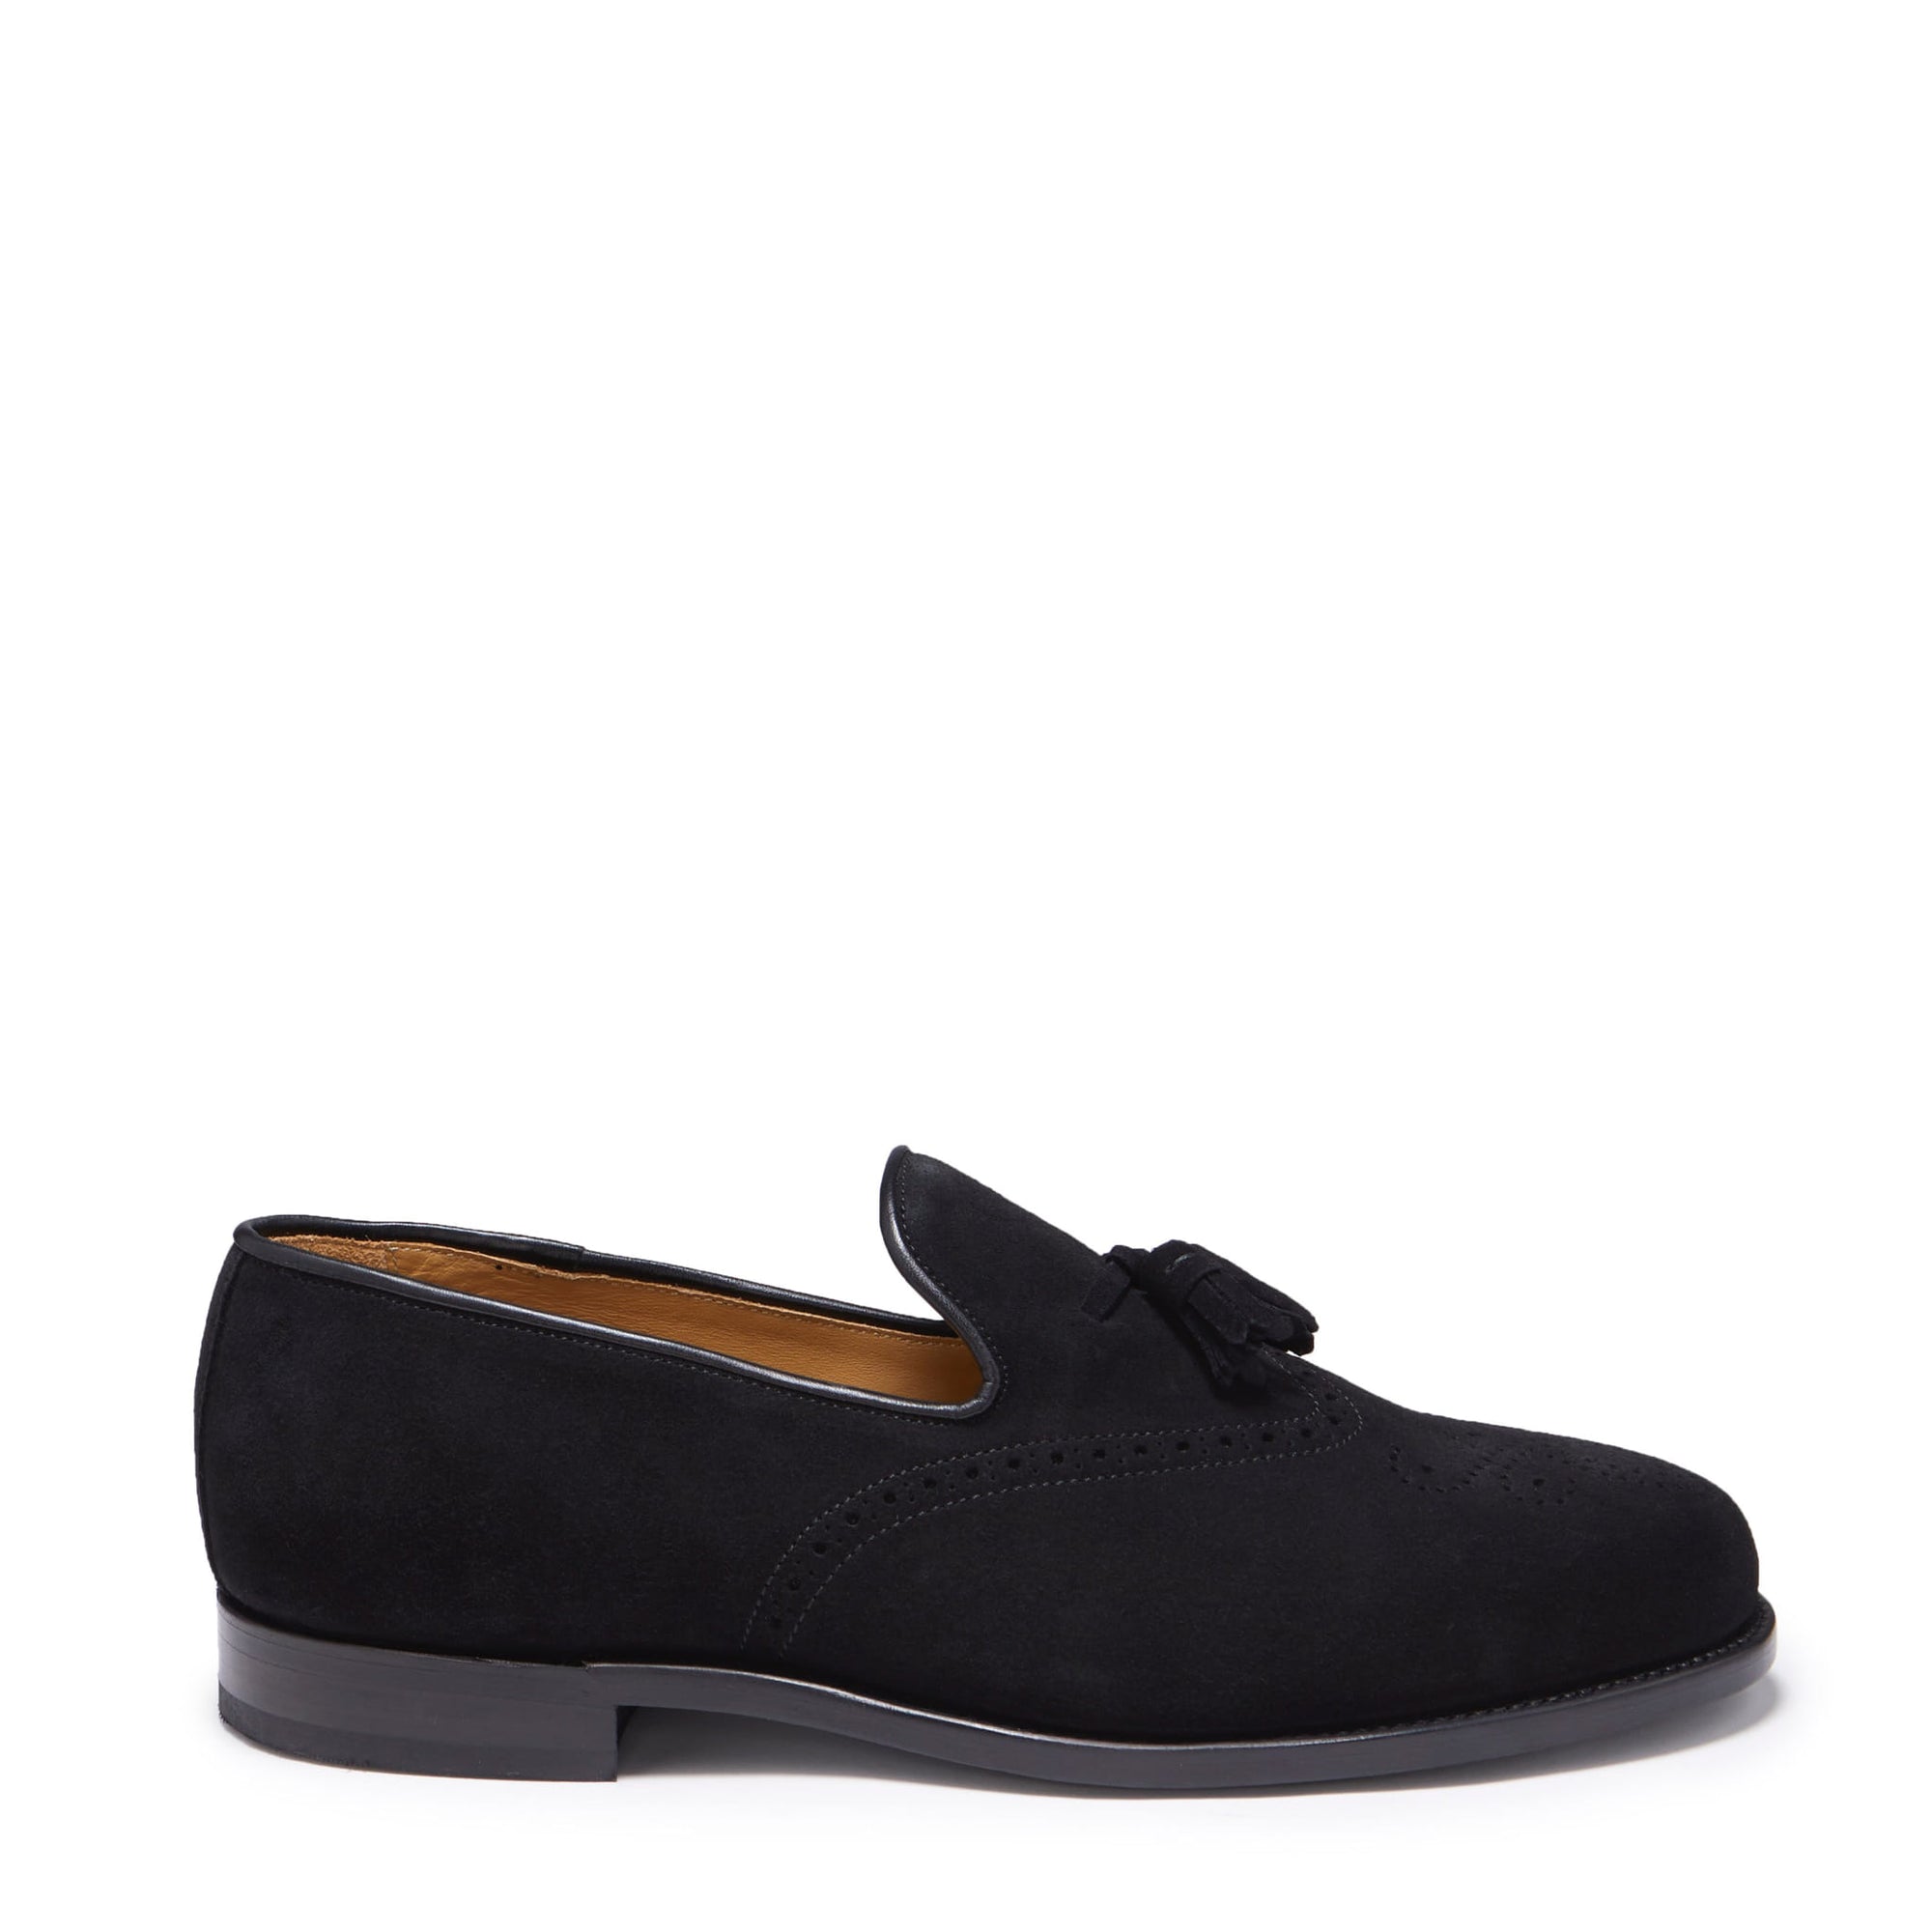 Hugs & Co. Black Suede Tasselled Brogues, Welted Leather Sole